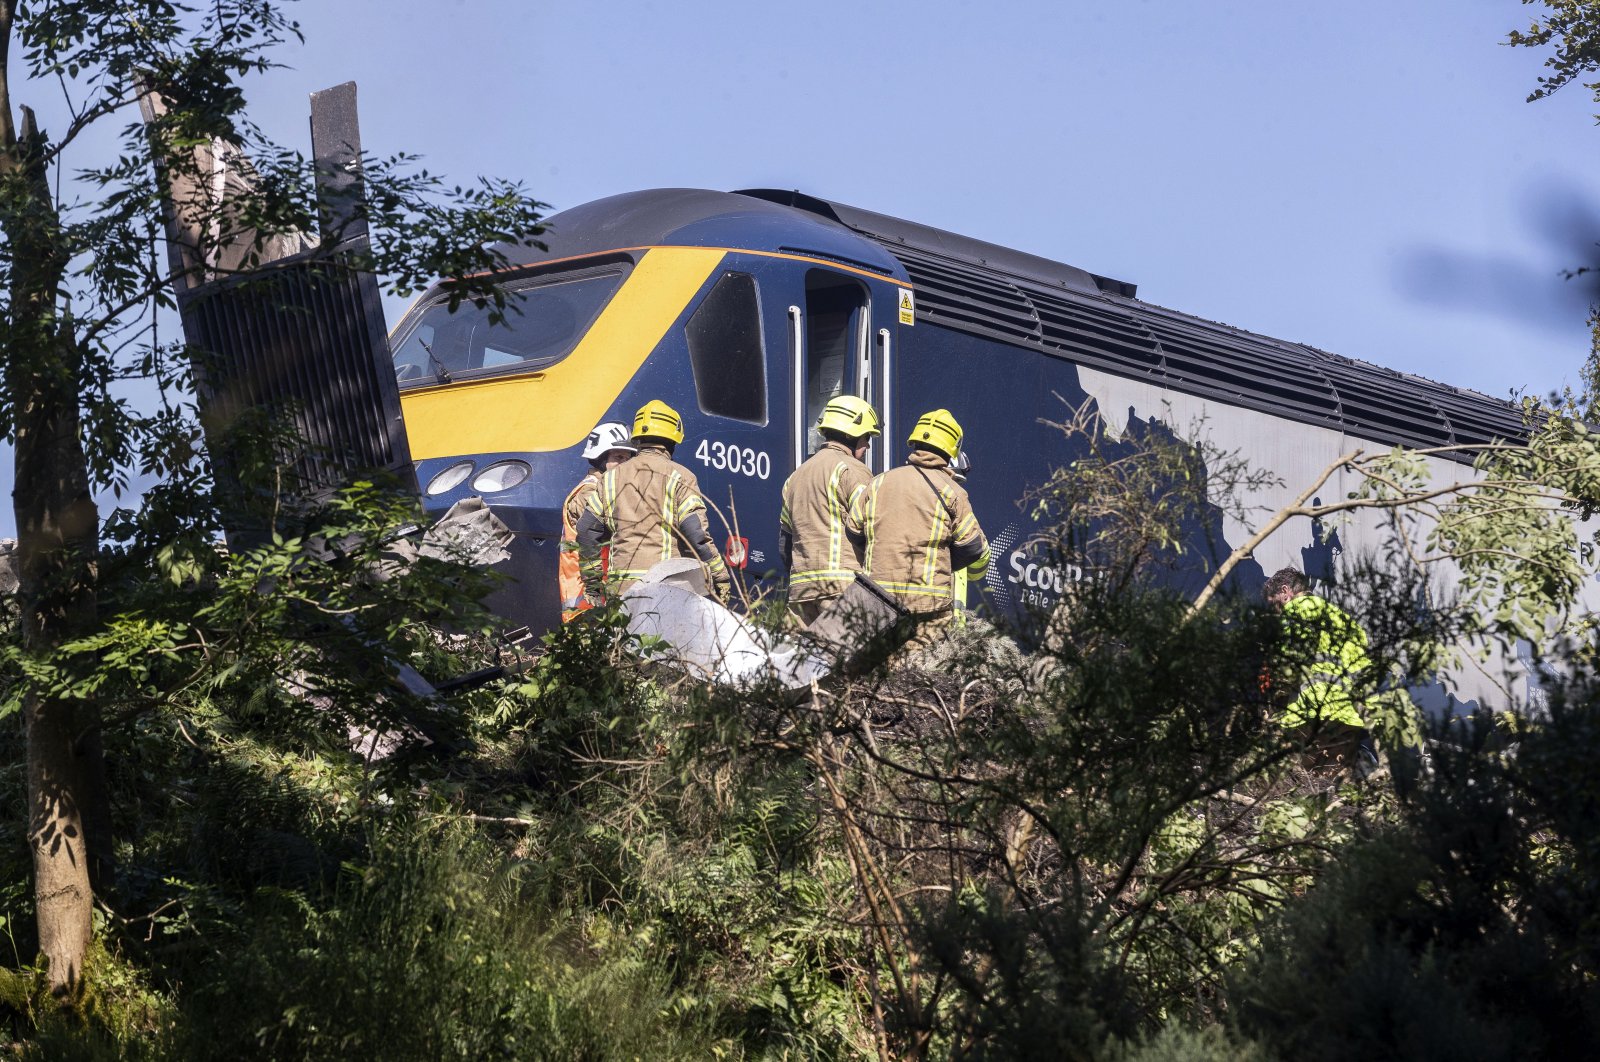 Emergency services attend the scene of a derailed train in Stonehaven, Scotland, Aug. 12, 2020. (AP Photo)